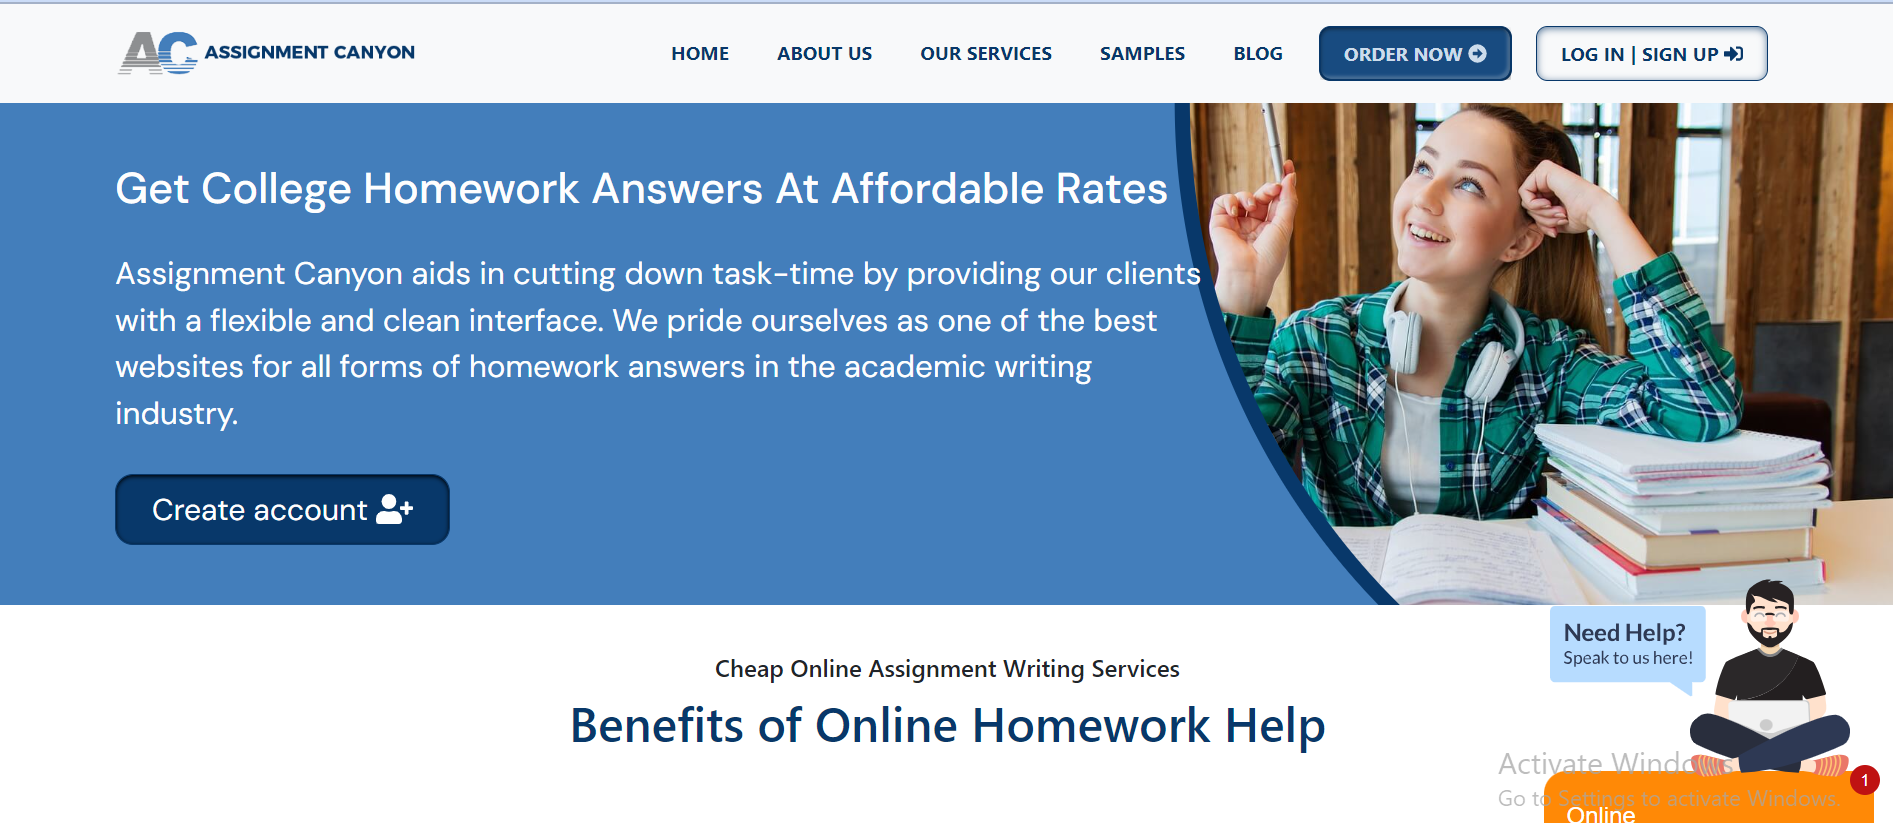 Assignment Canyon Homepage - Access Affordable Academic Writing Services